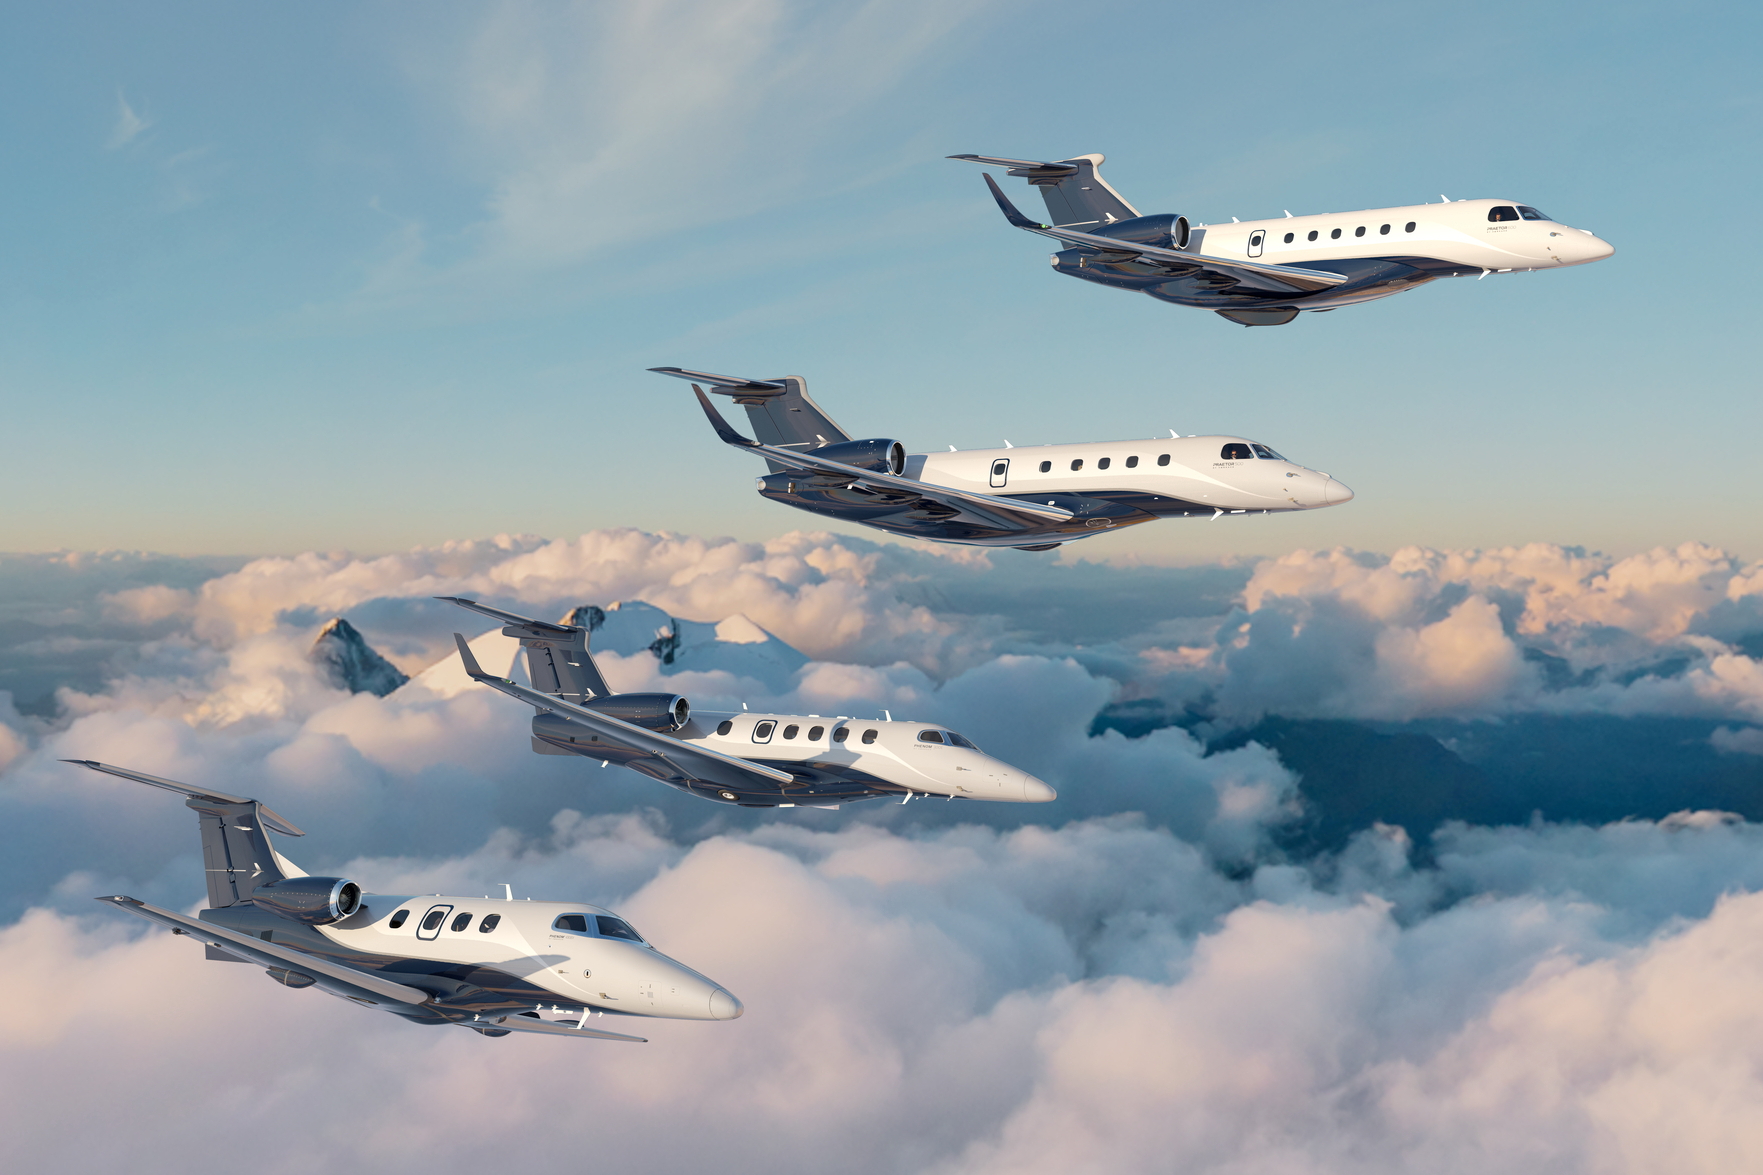 Embraer's family of executive jets. Click to enlarge.